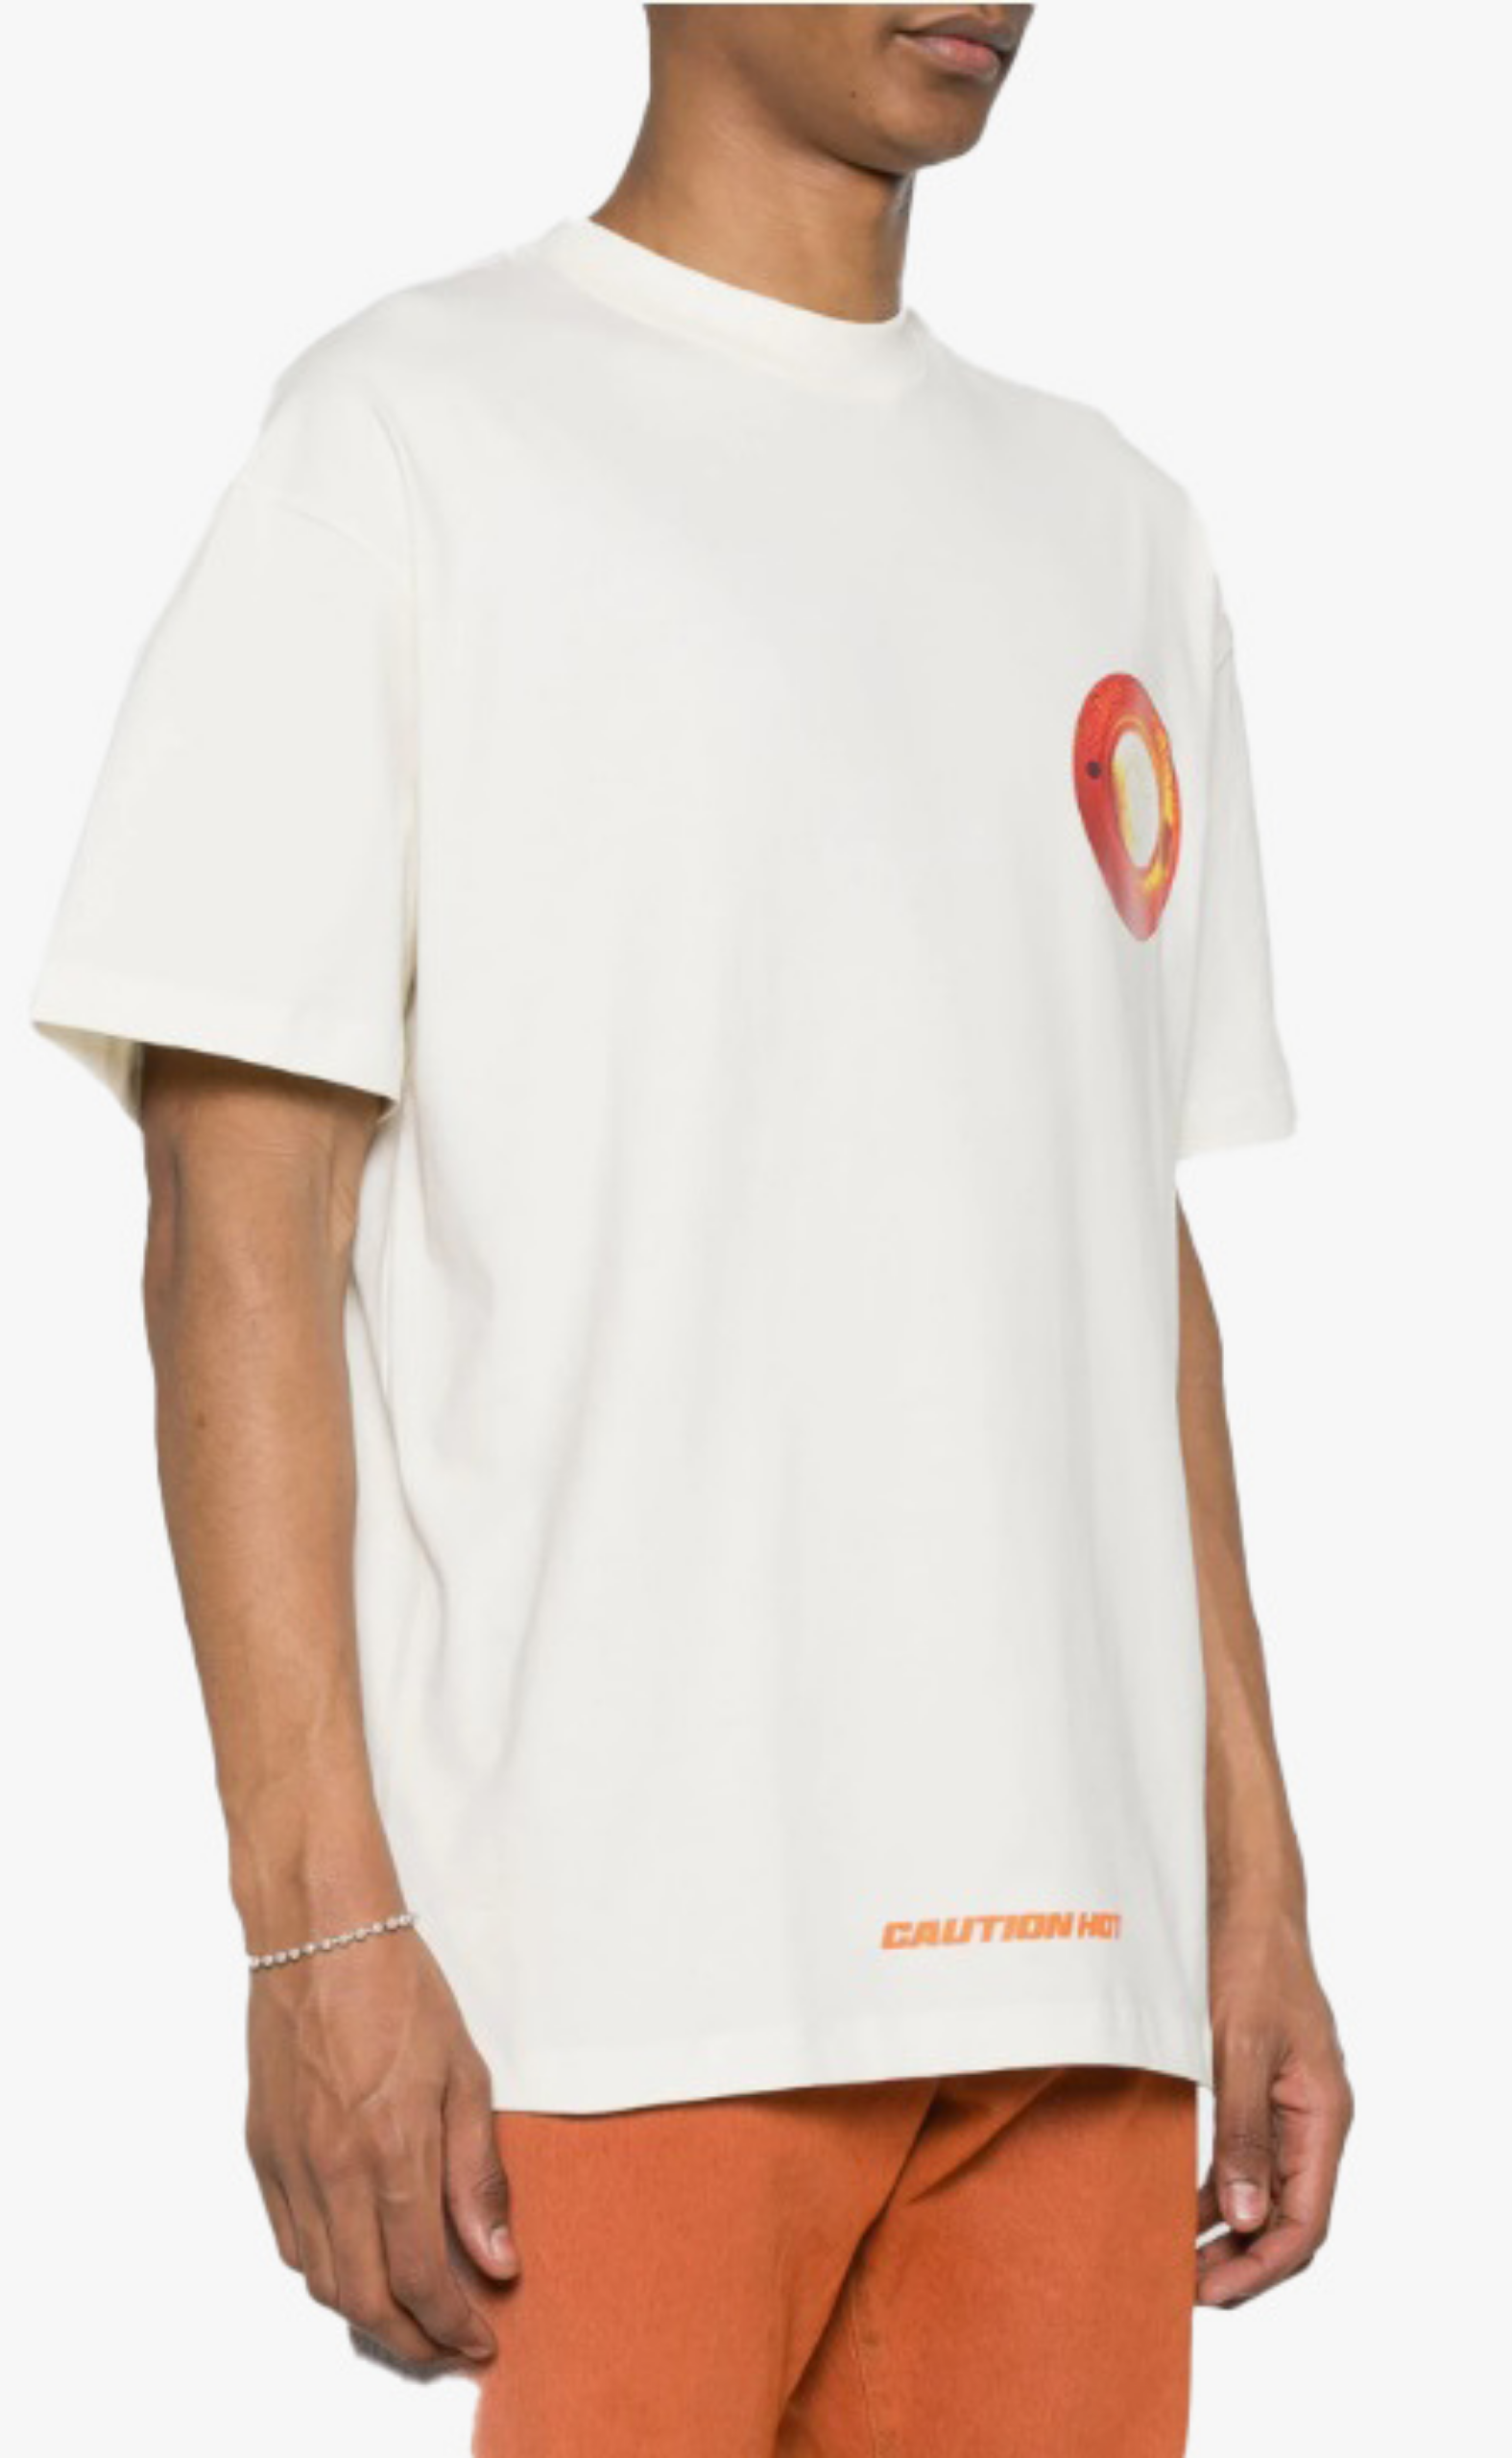 CAUTION HOT GRAPHIC OFF WHITE T-SHIRT